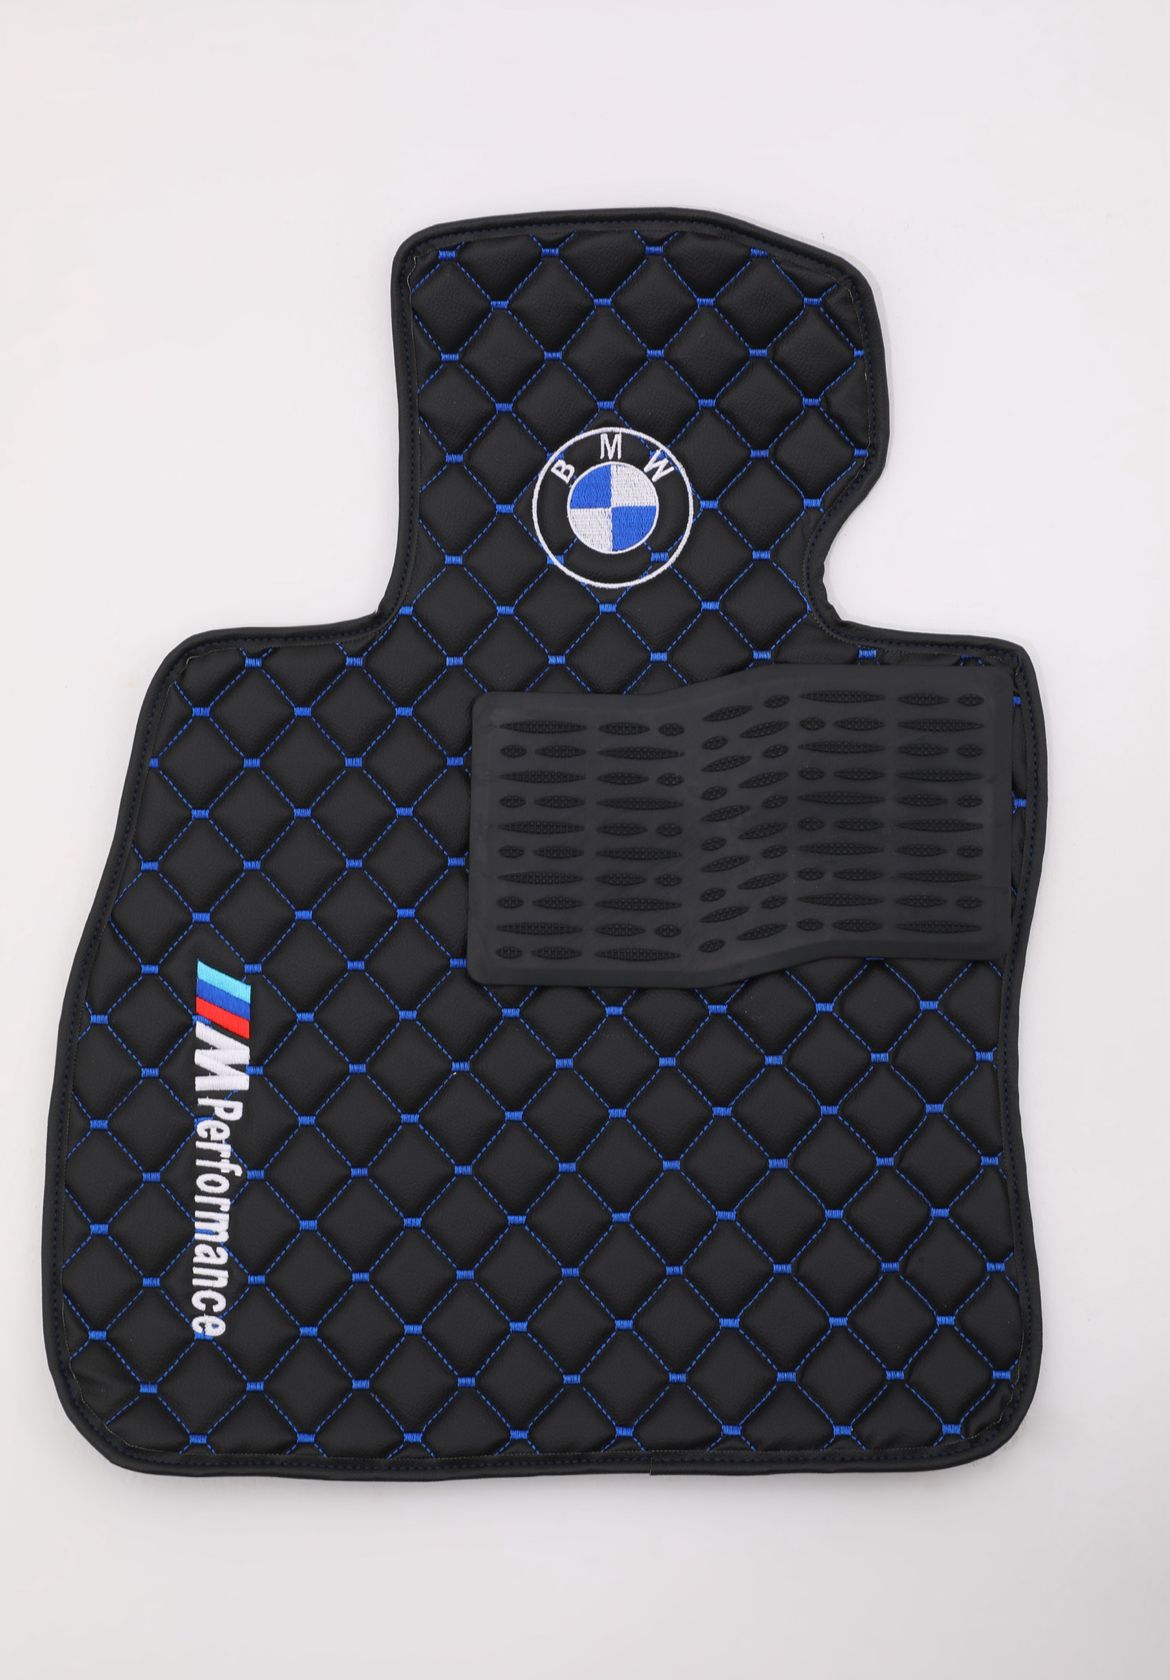 For all BMW 5 Series M PERFORMANCE Luxury Leather Custom Car Mat 4x